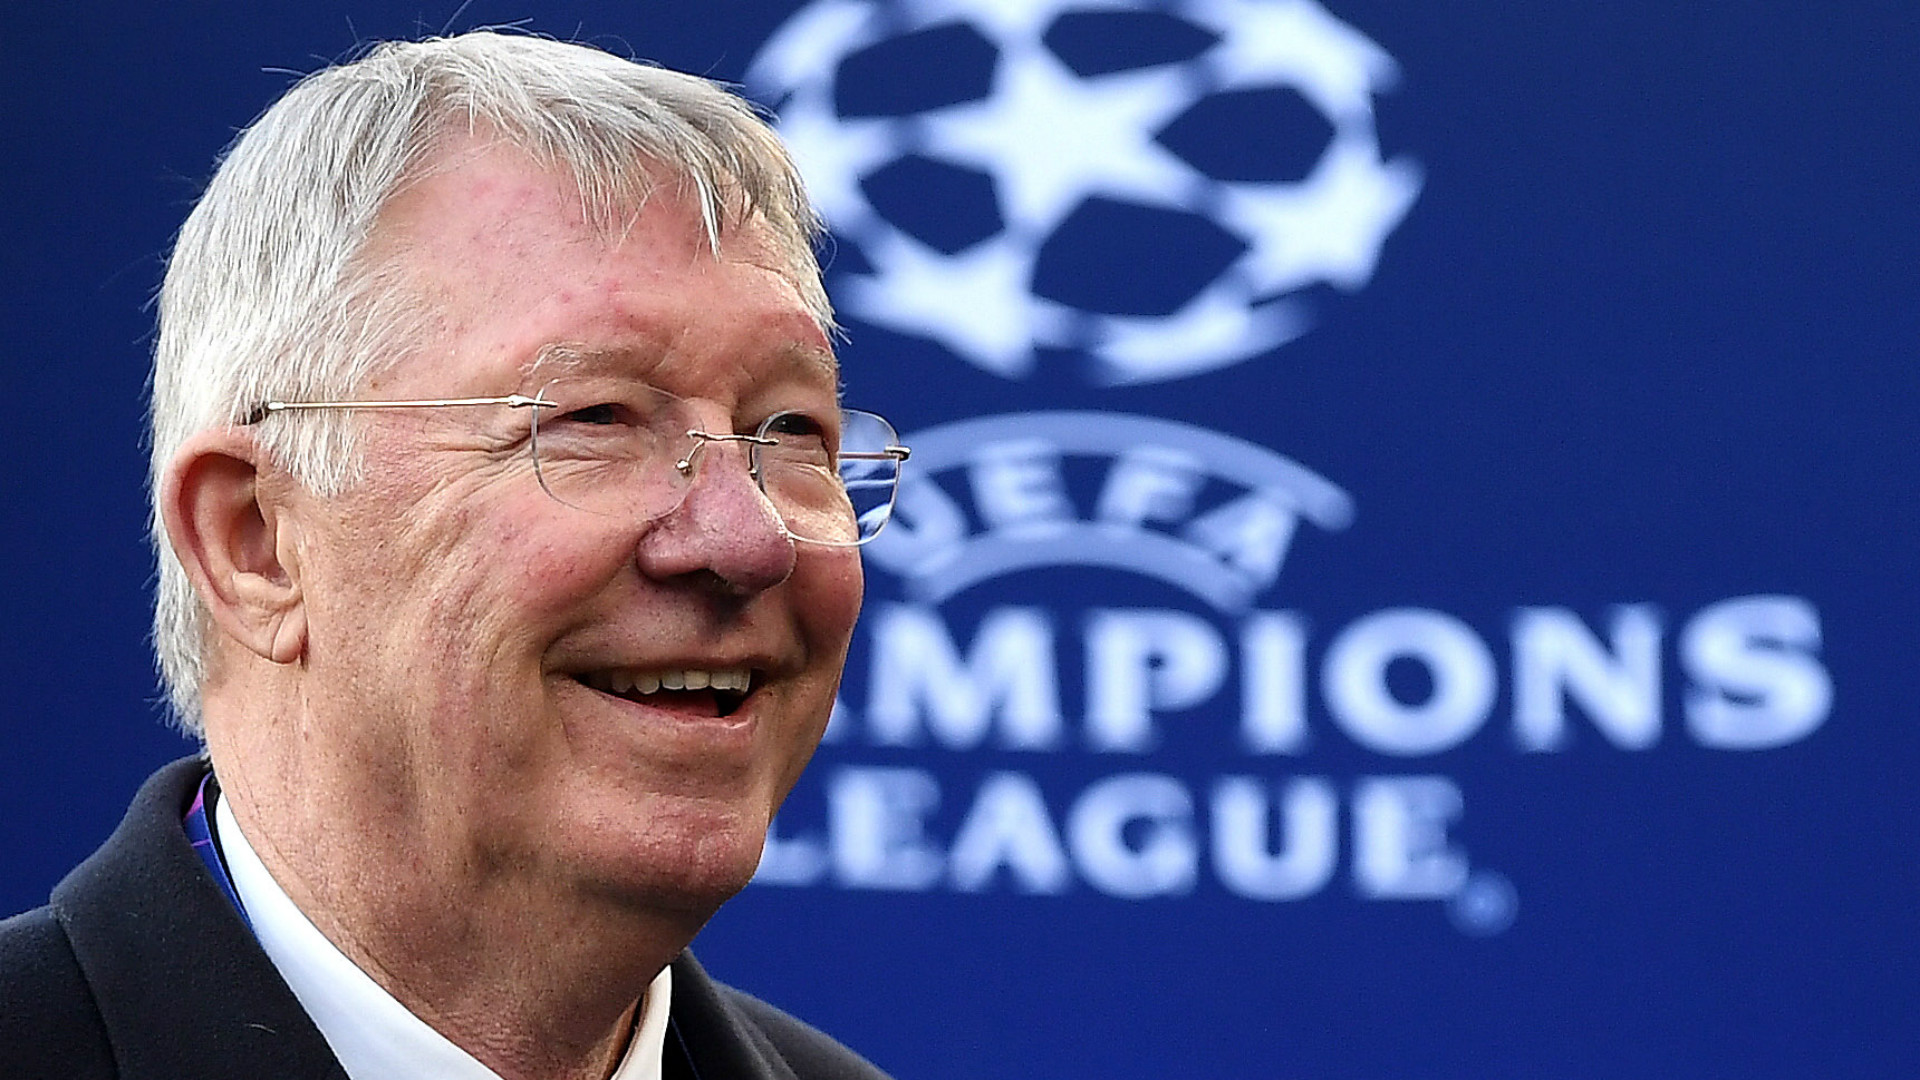 'A lot of clubs with great history could be lost' - Ferguson dismisses global Super League plans